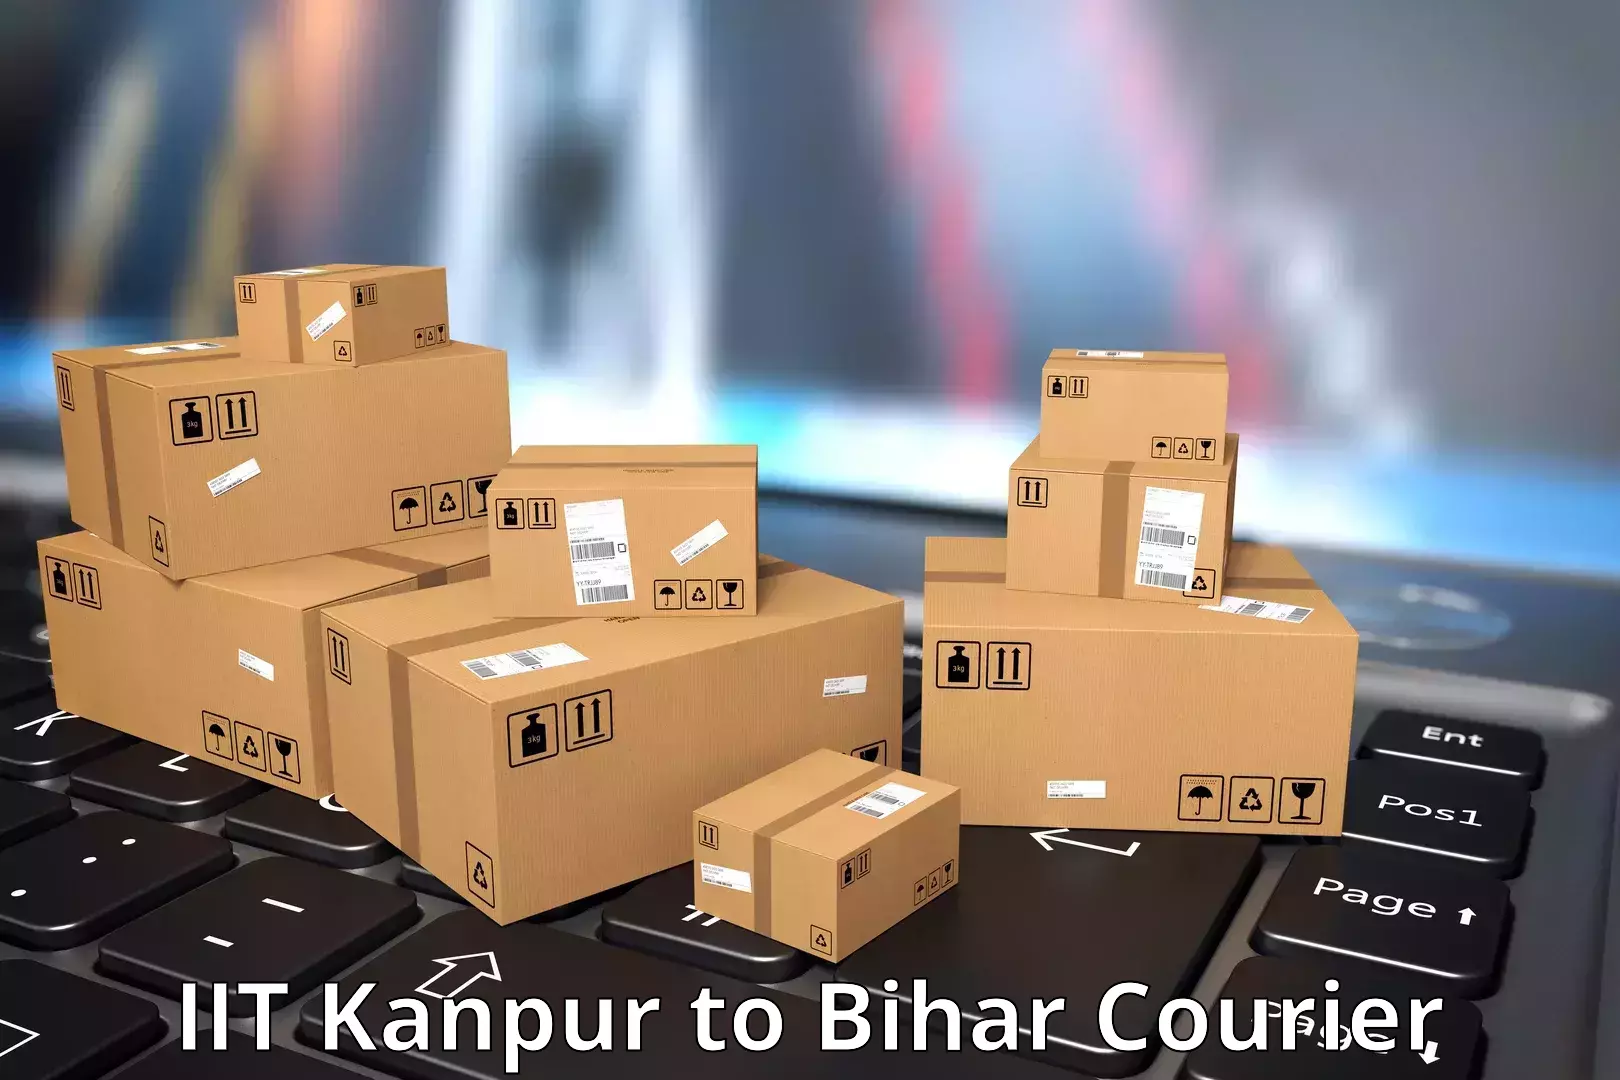 Reliable parcel services IIT Kanpur to Alamnagar